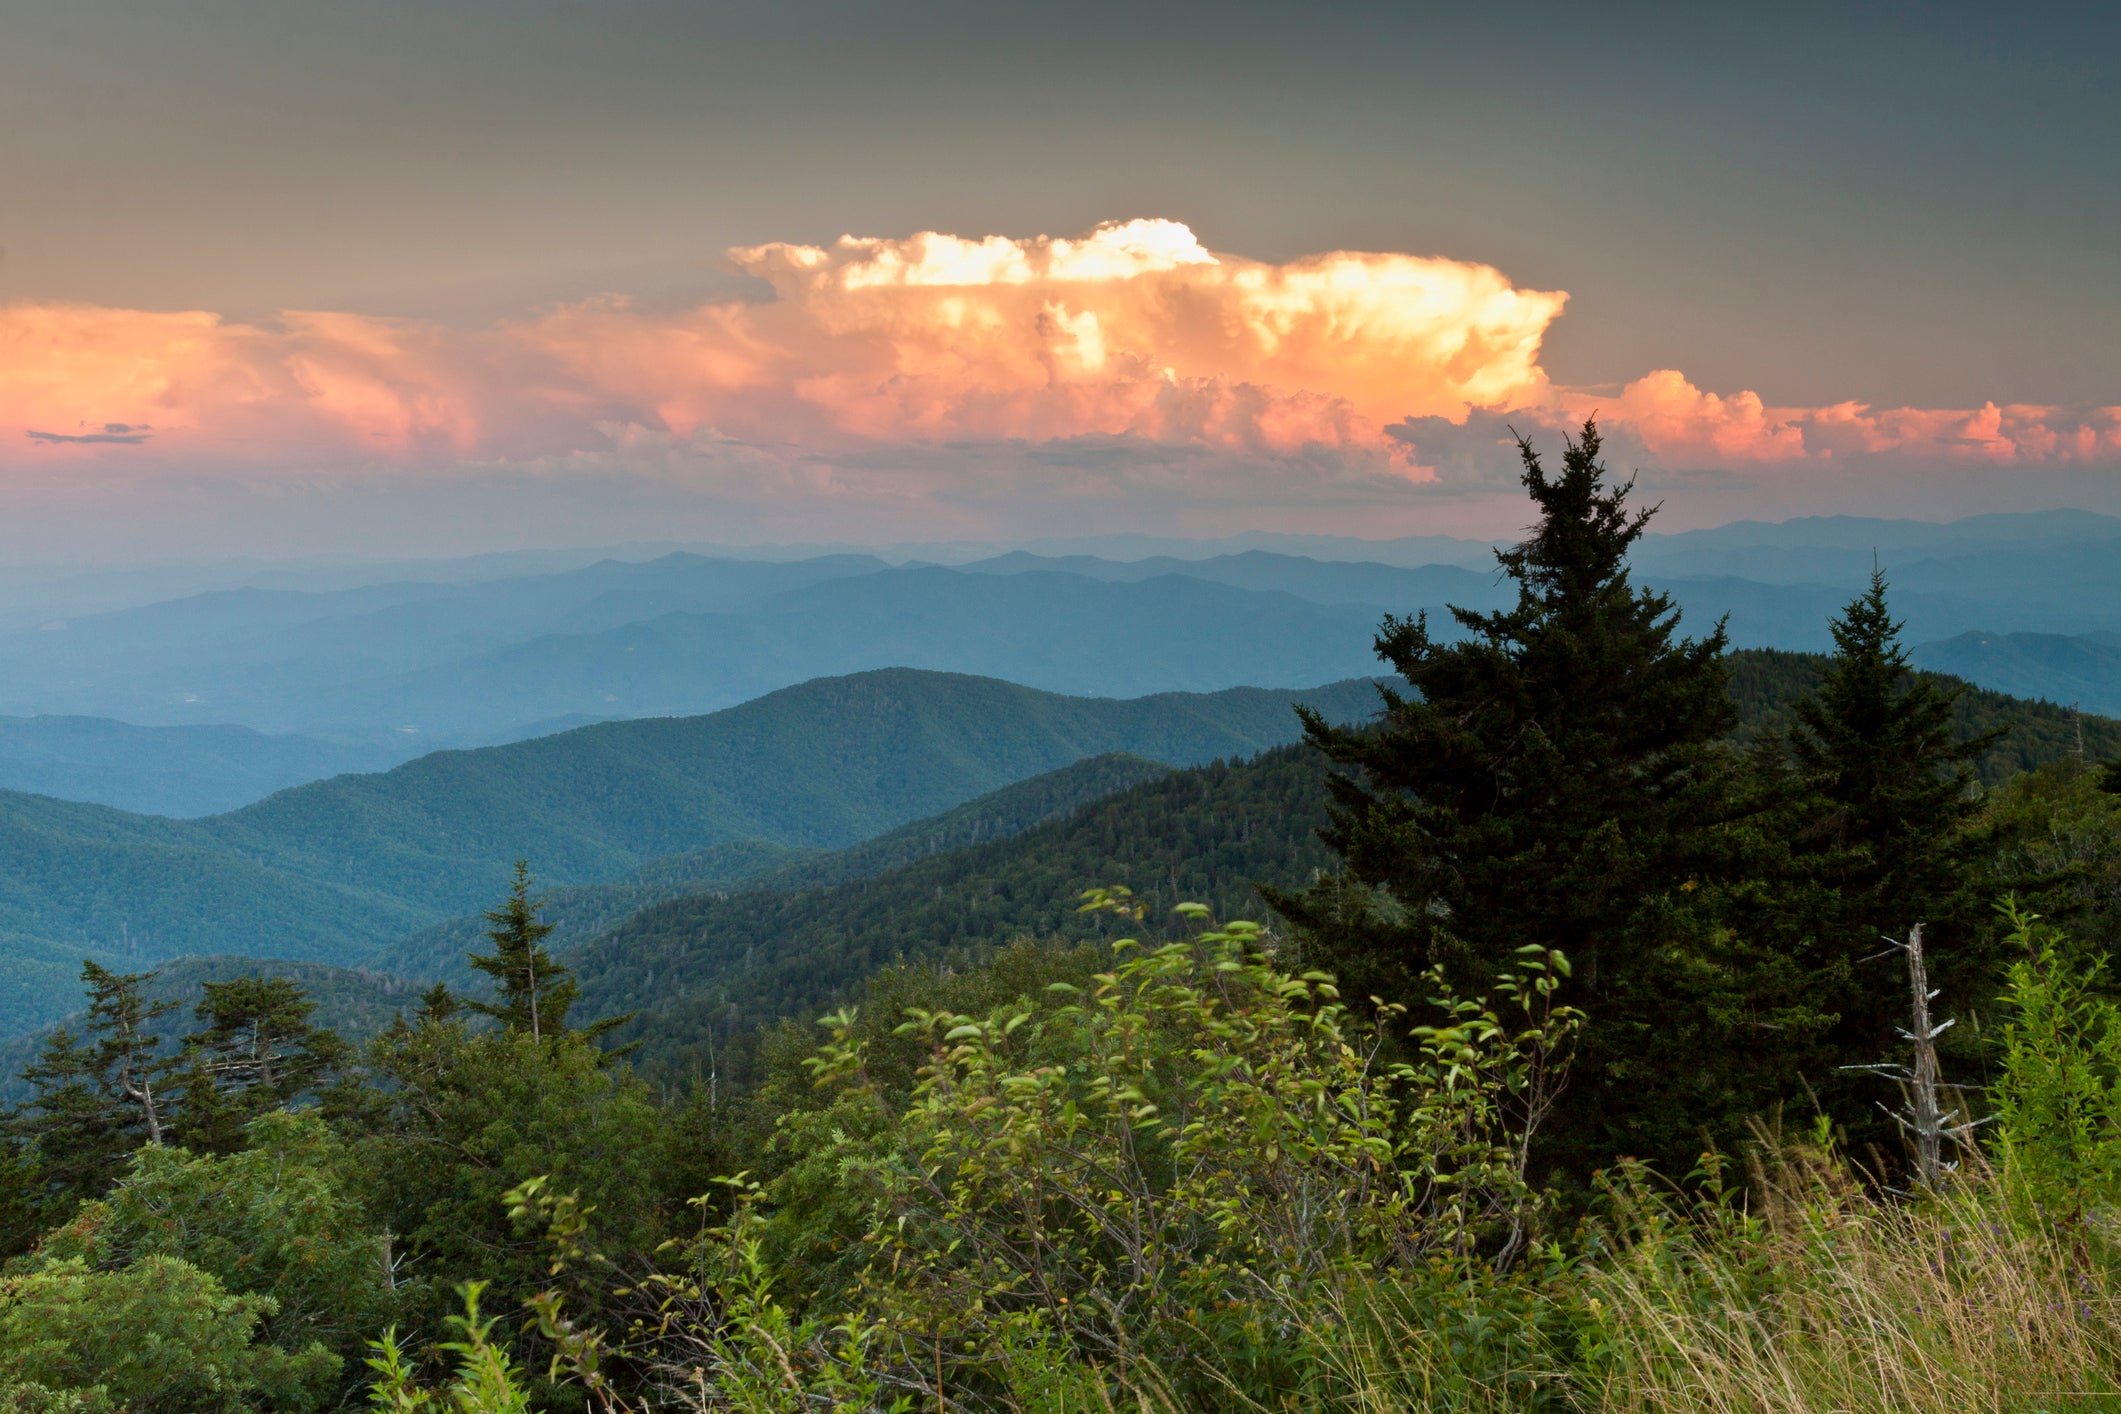 Sunset from Clingmans Dome in Great Smoky Mountains National Park